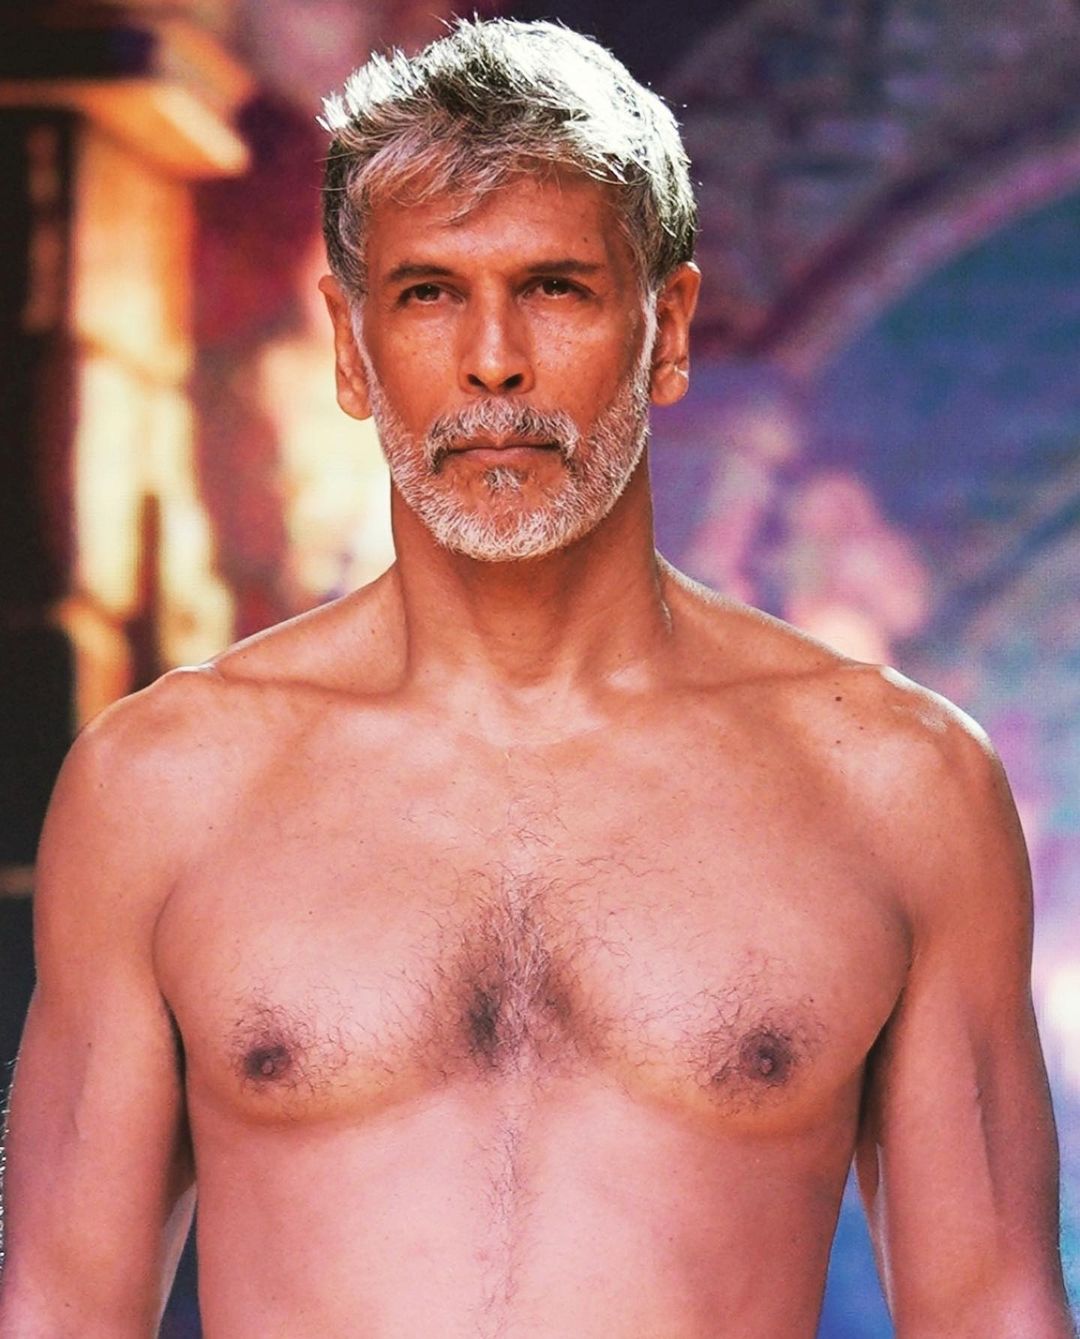 Shirtless Bollywood Men Milind Soman Now And Then India S Hottest Male Model Of All Time